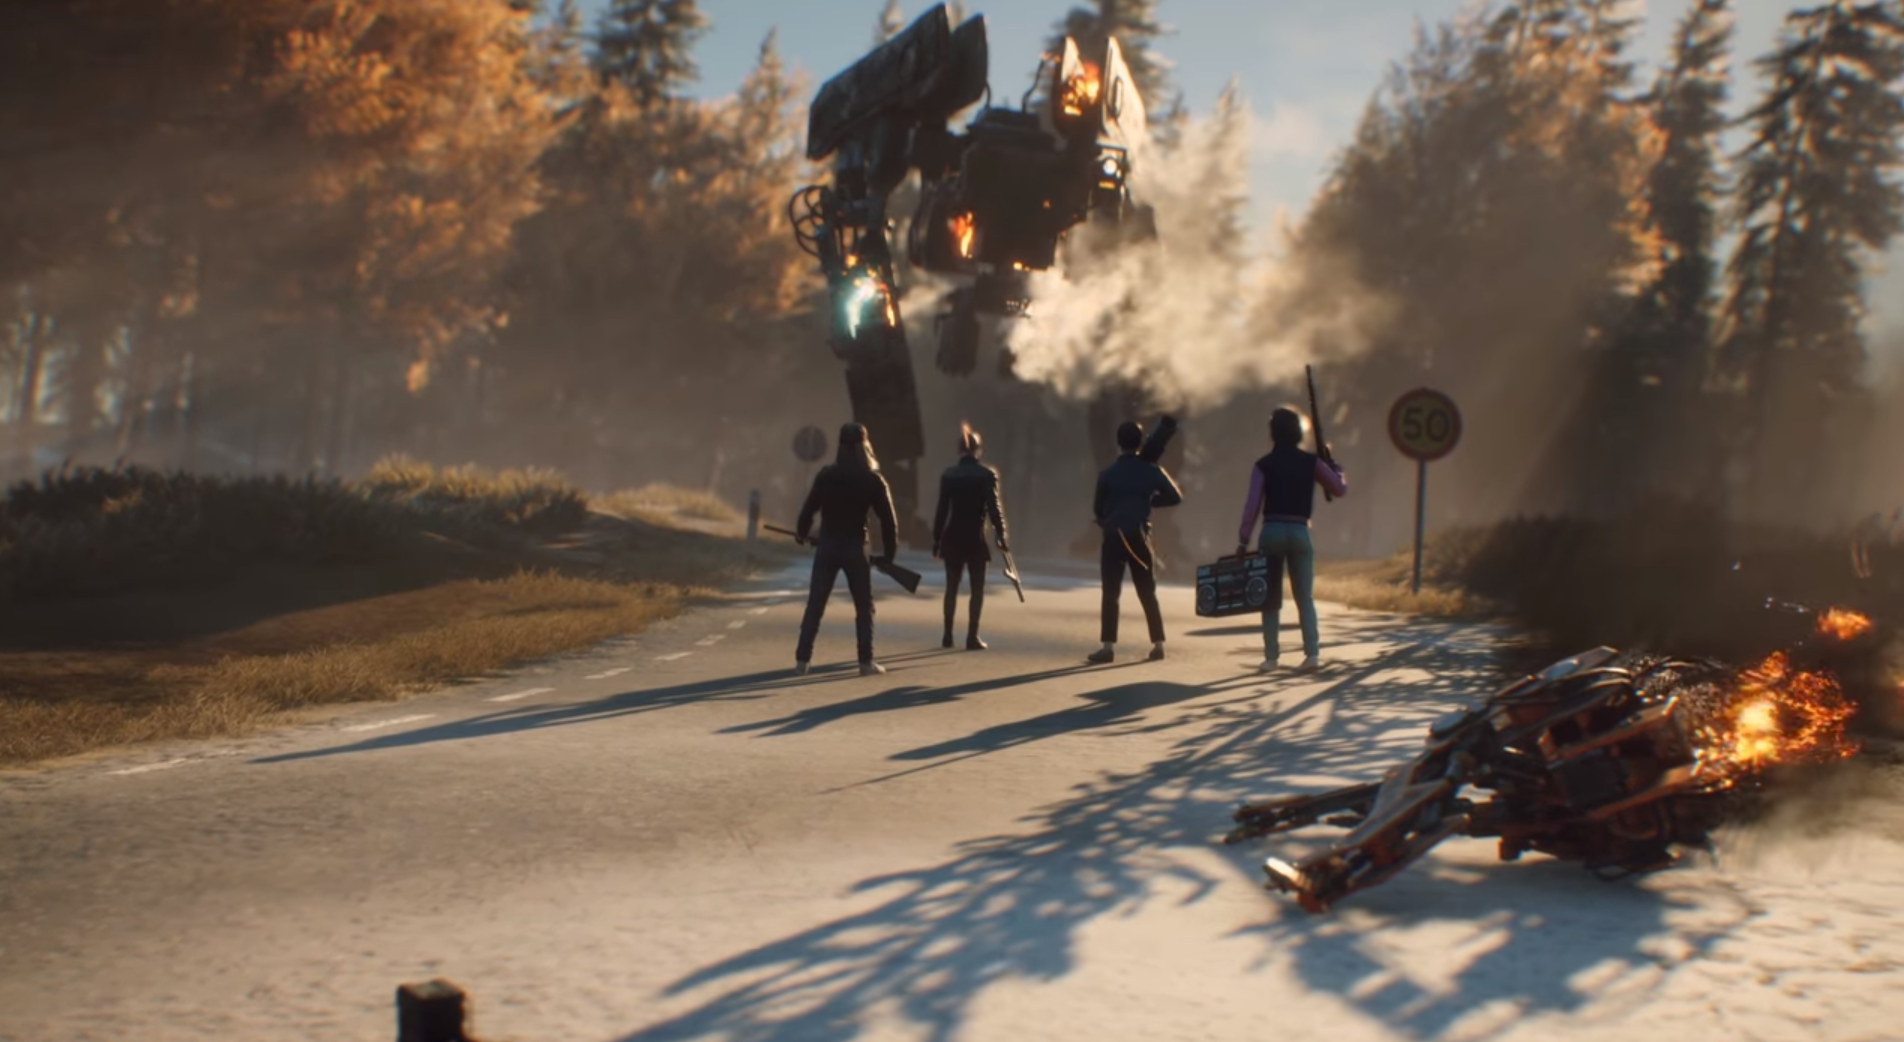 Image for Generation Zero is an ‘80s-themed co-op shooter set in a Swedish open world, developed by Avalanche